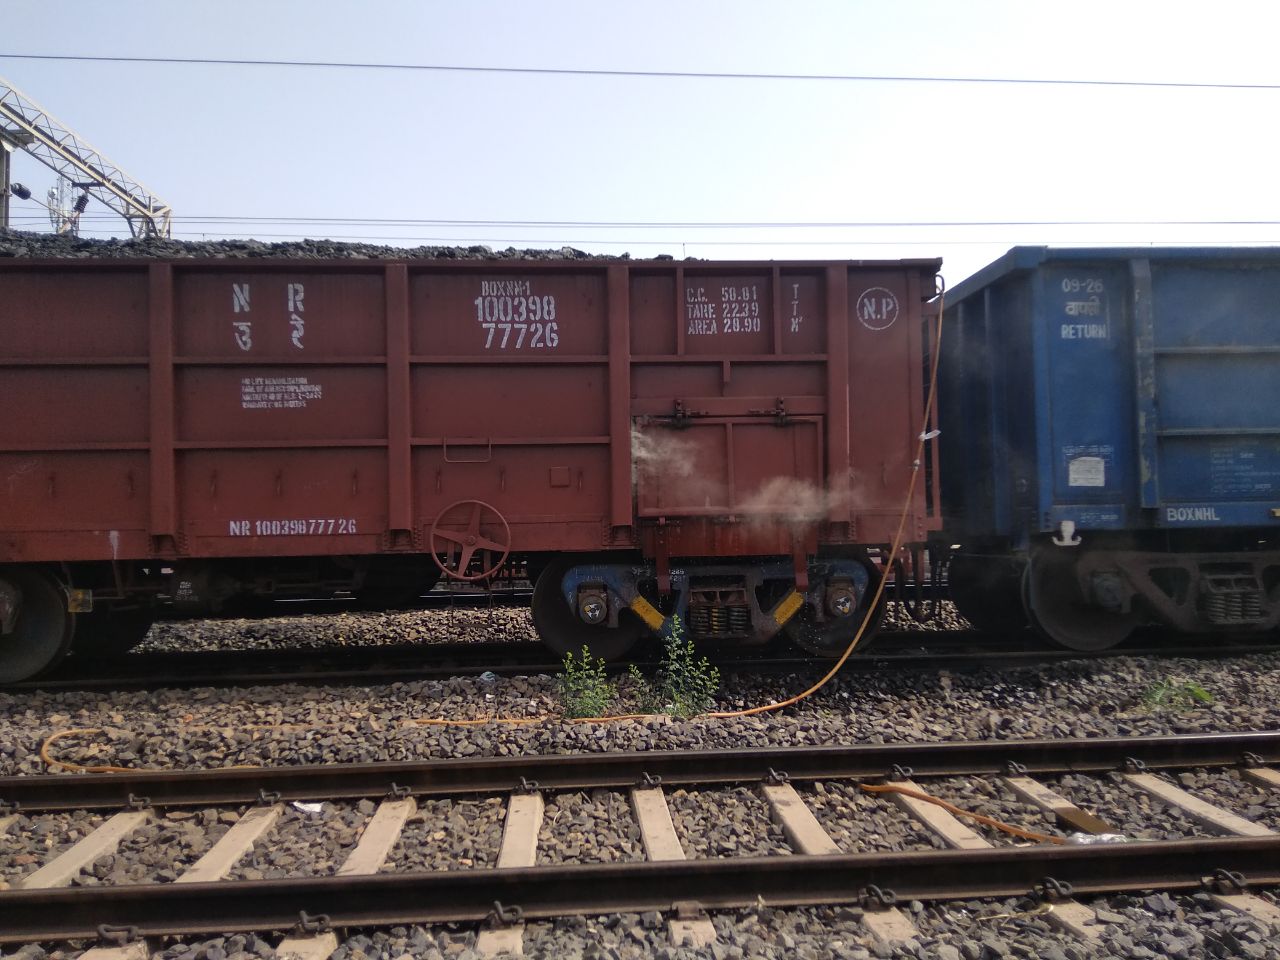 Goods train parked at this railway station for two months now left, fi